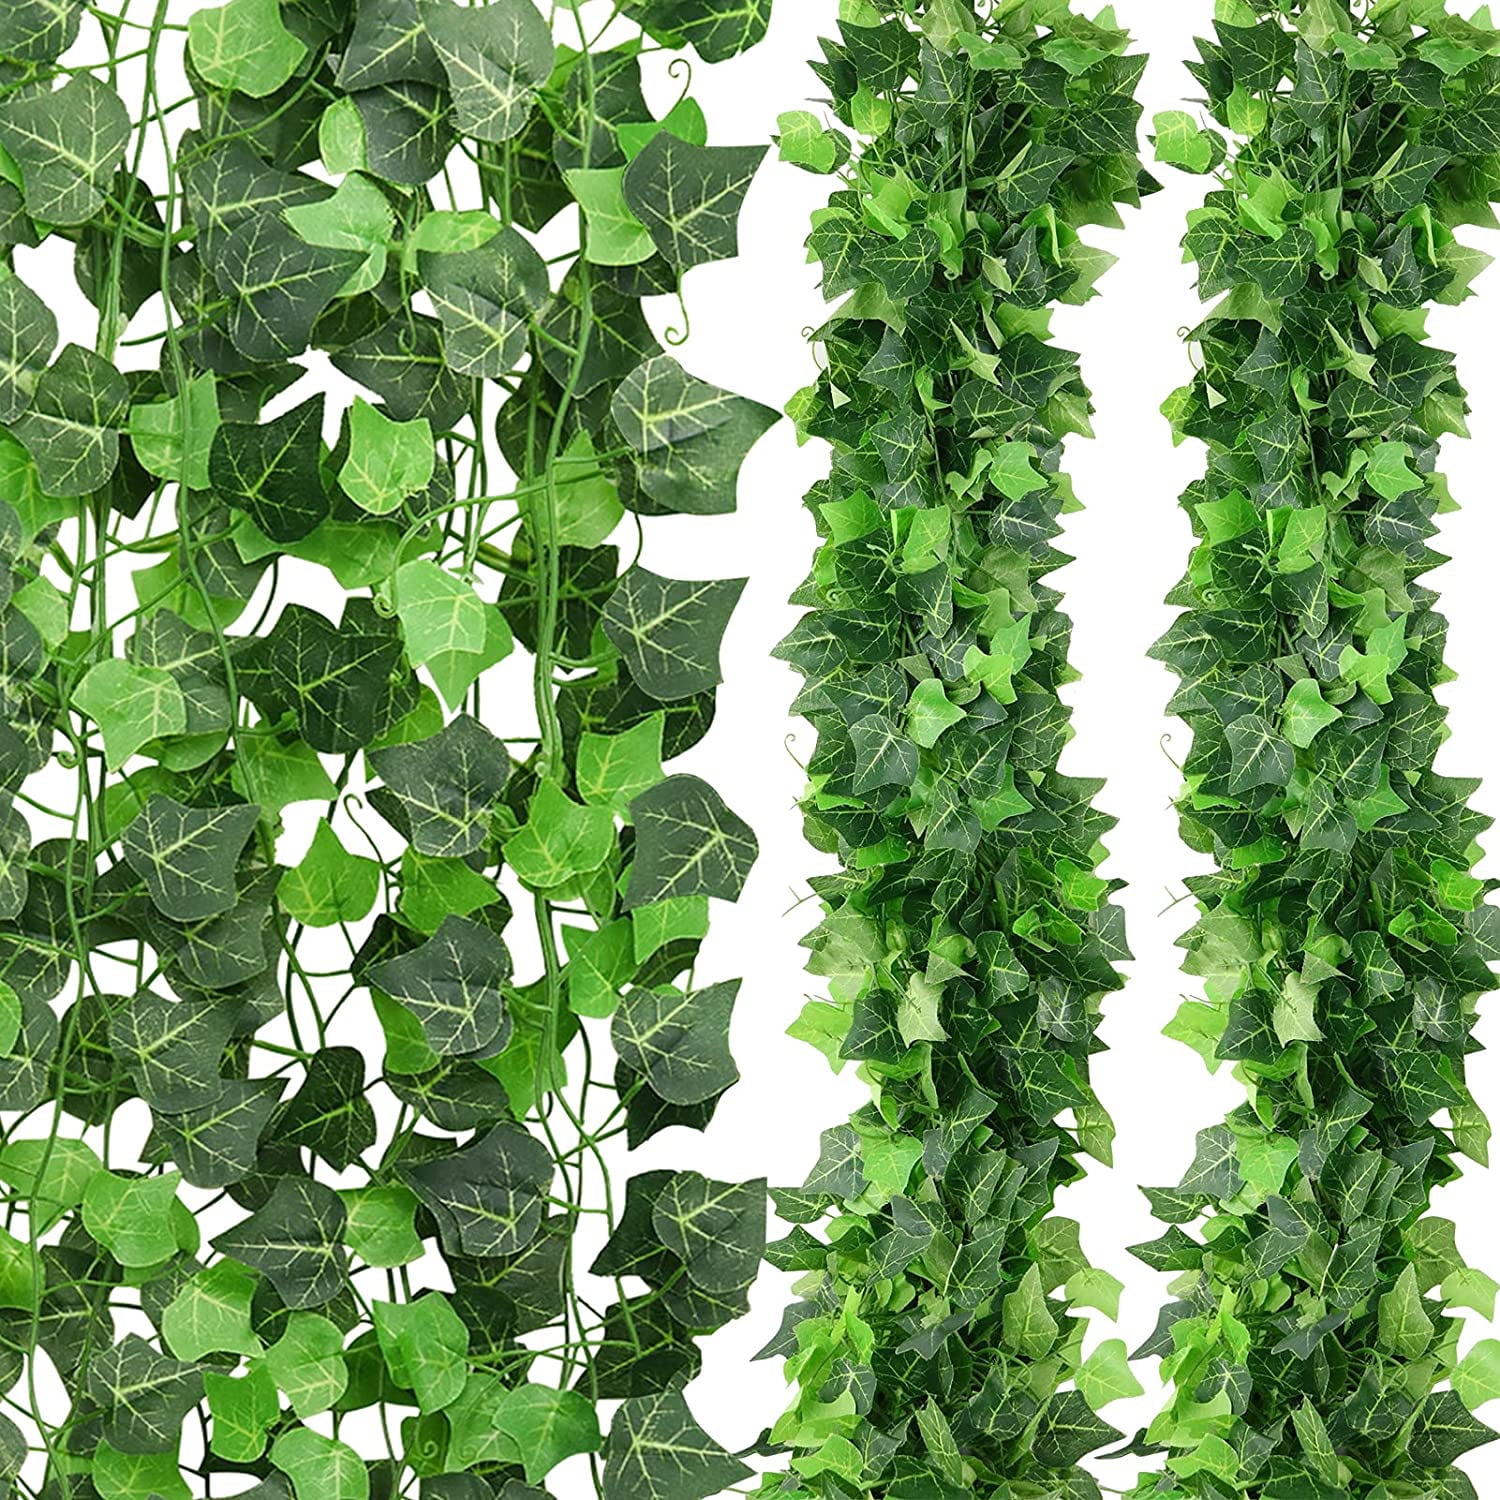 12PC 7.5ft Fake Ivy Leaves Artificial Greenery Vines for Room Decor Leaf Garland 